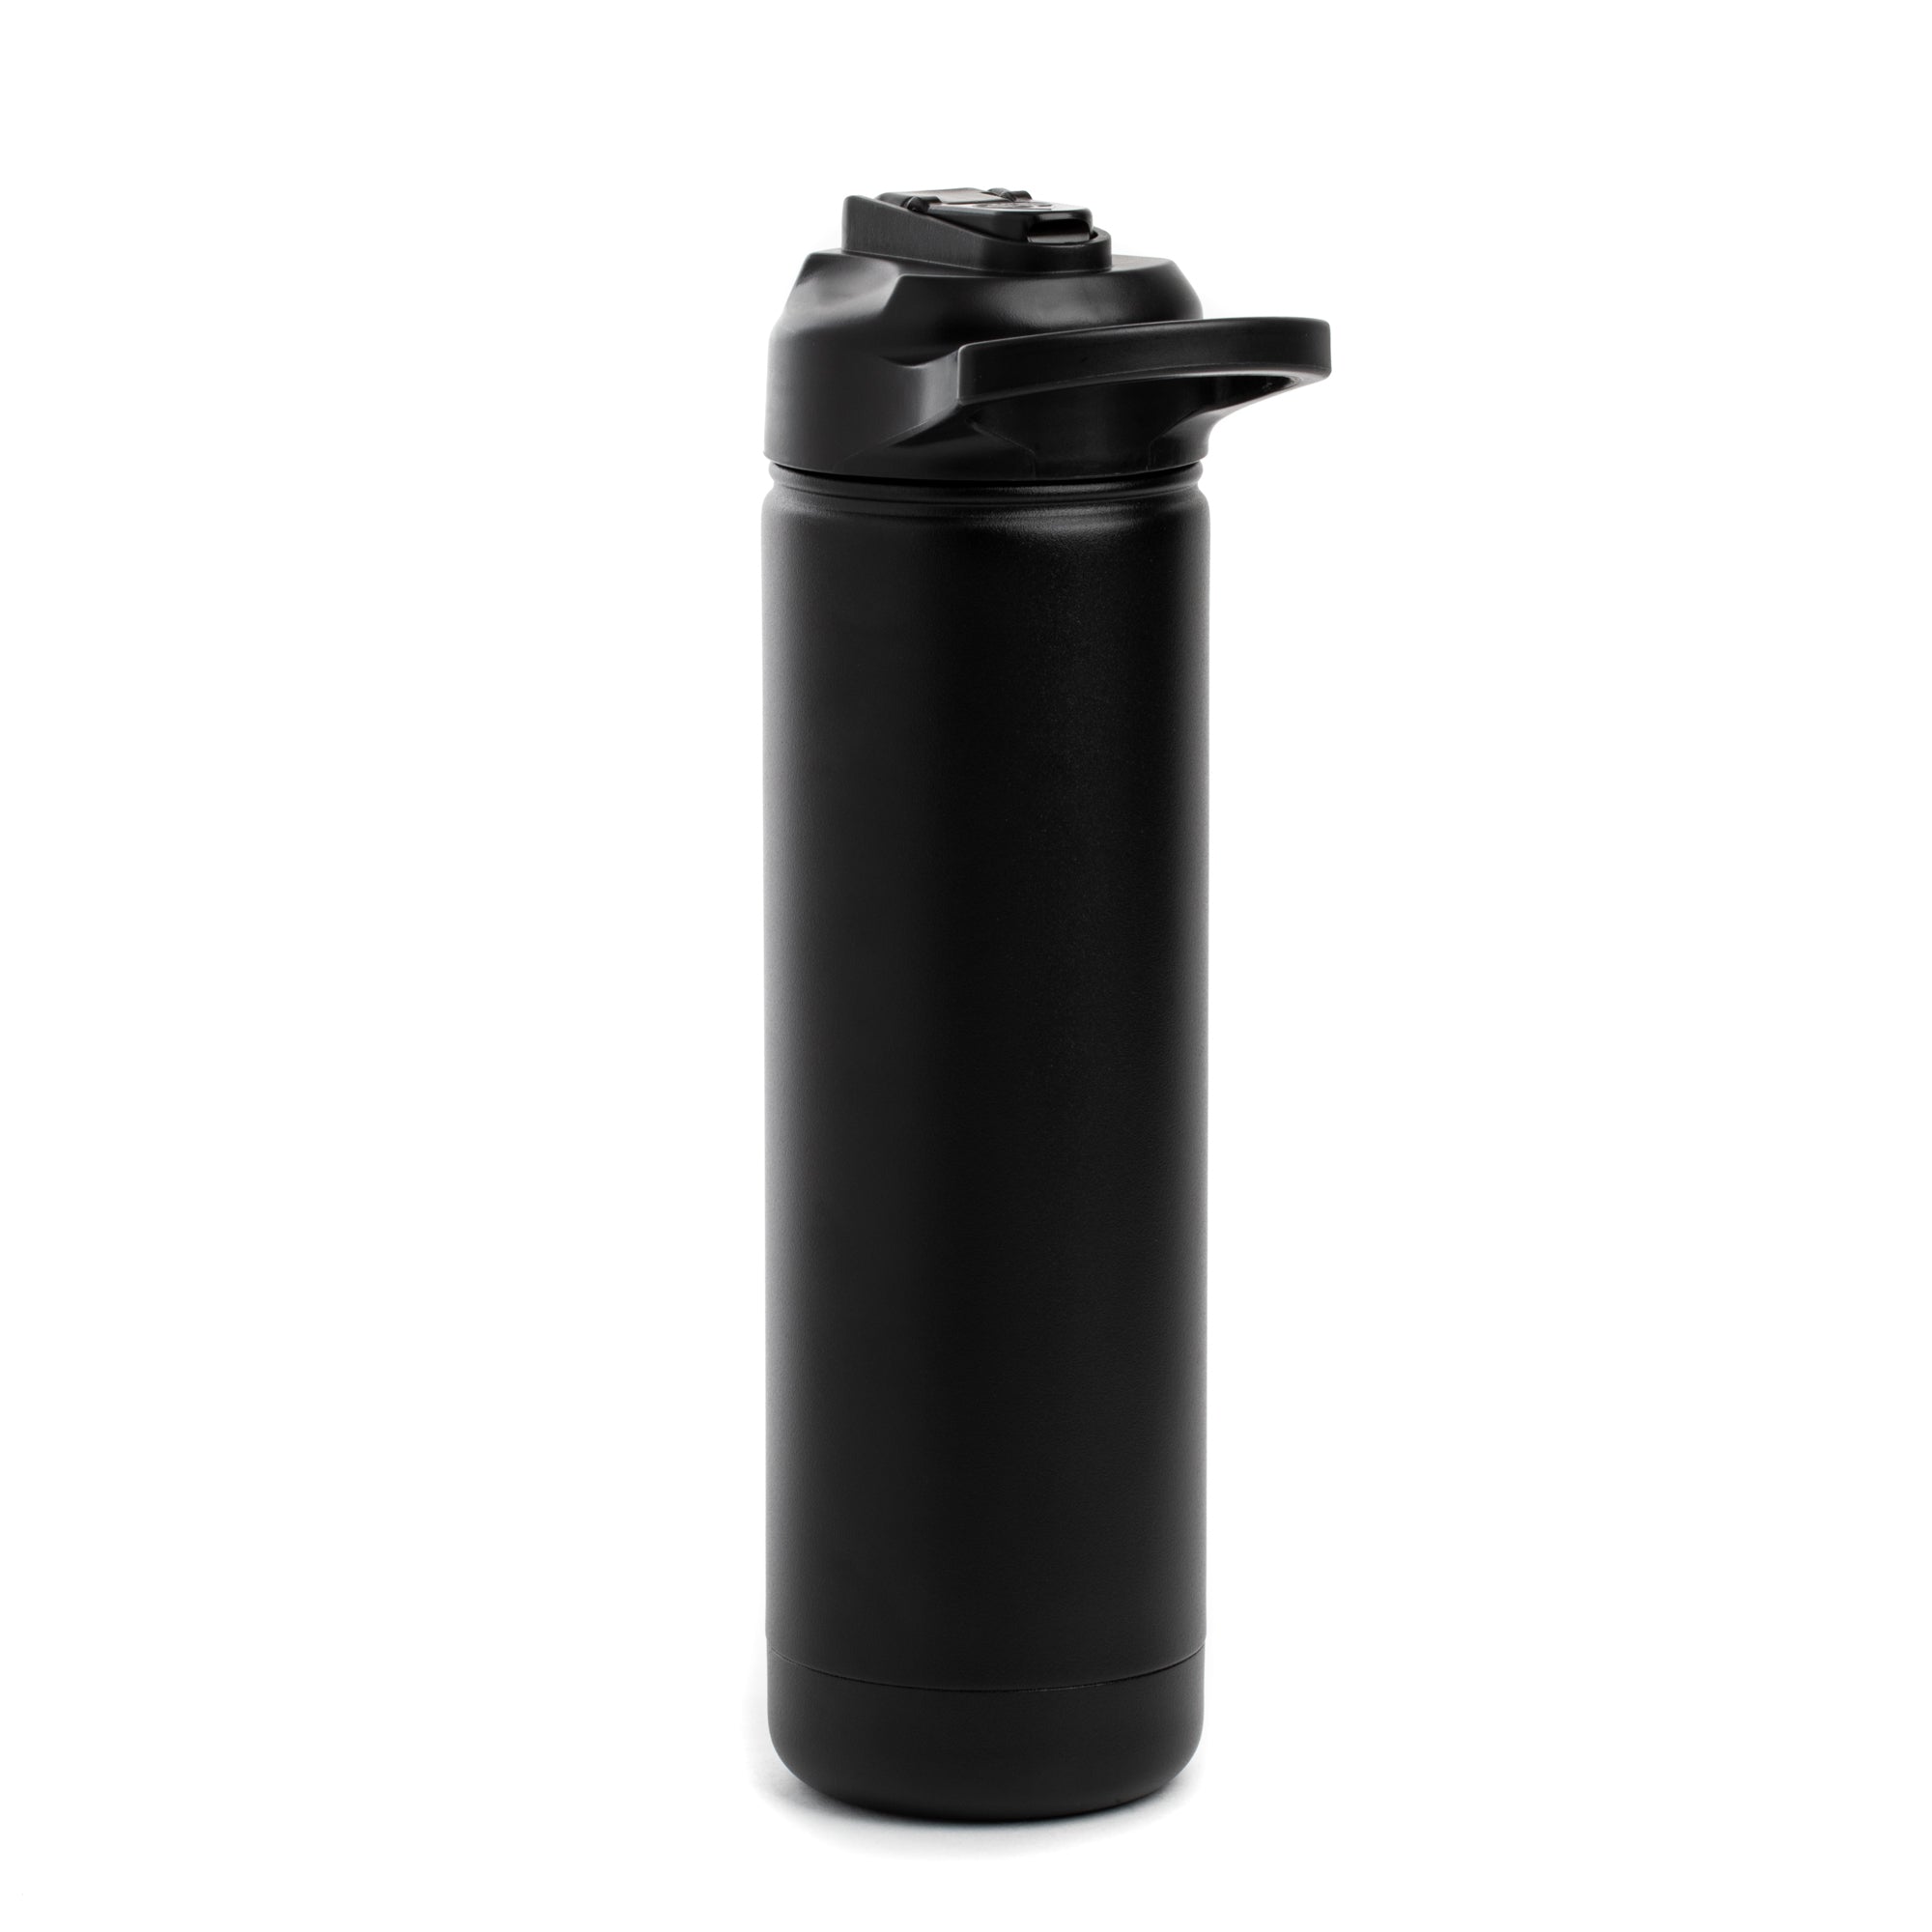  Tal Water Bottle Double Wall Insulated Stainless Steel Ranger  Pro - 26oz - Black : Sports & Outdoors